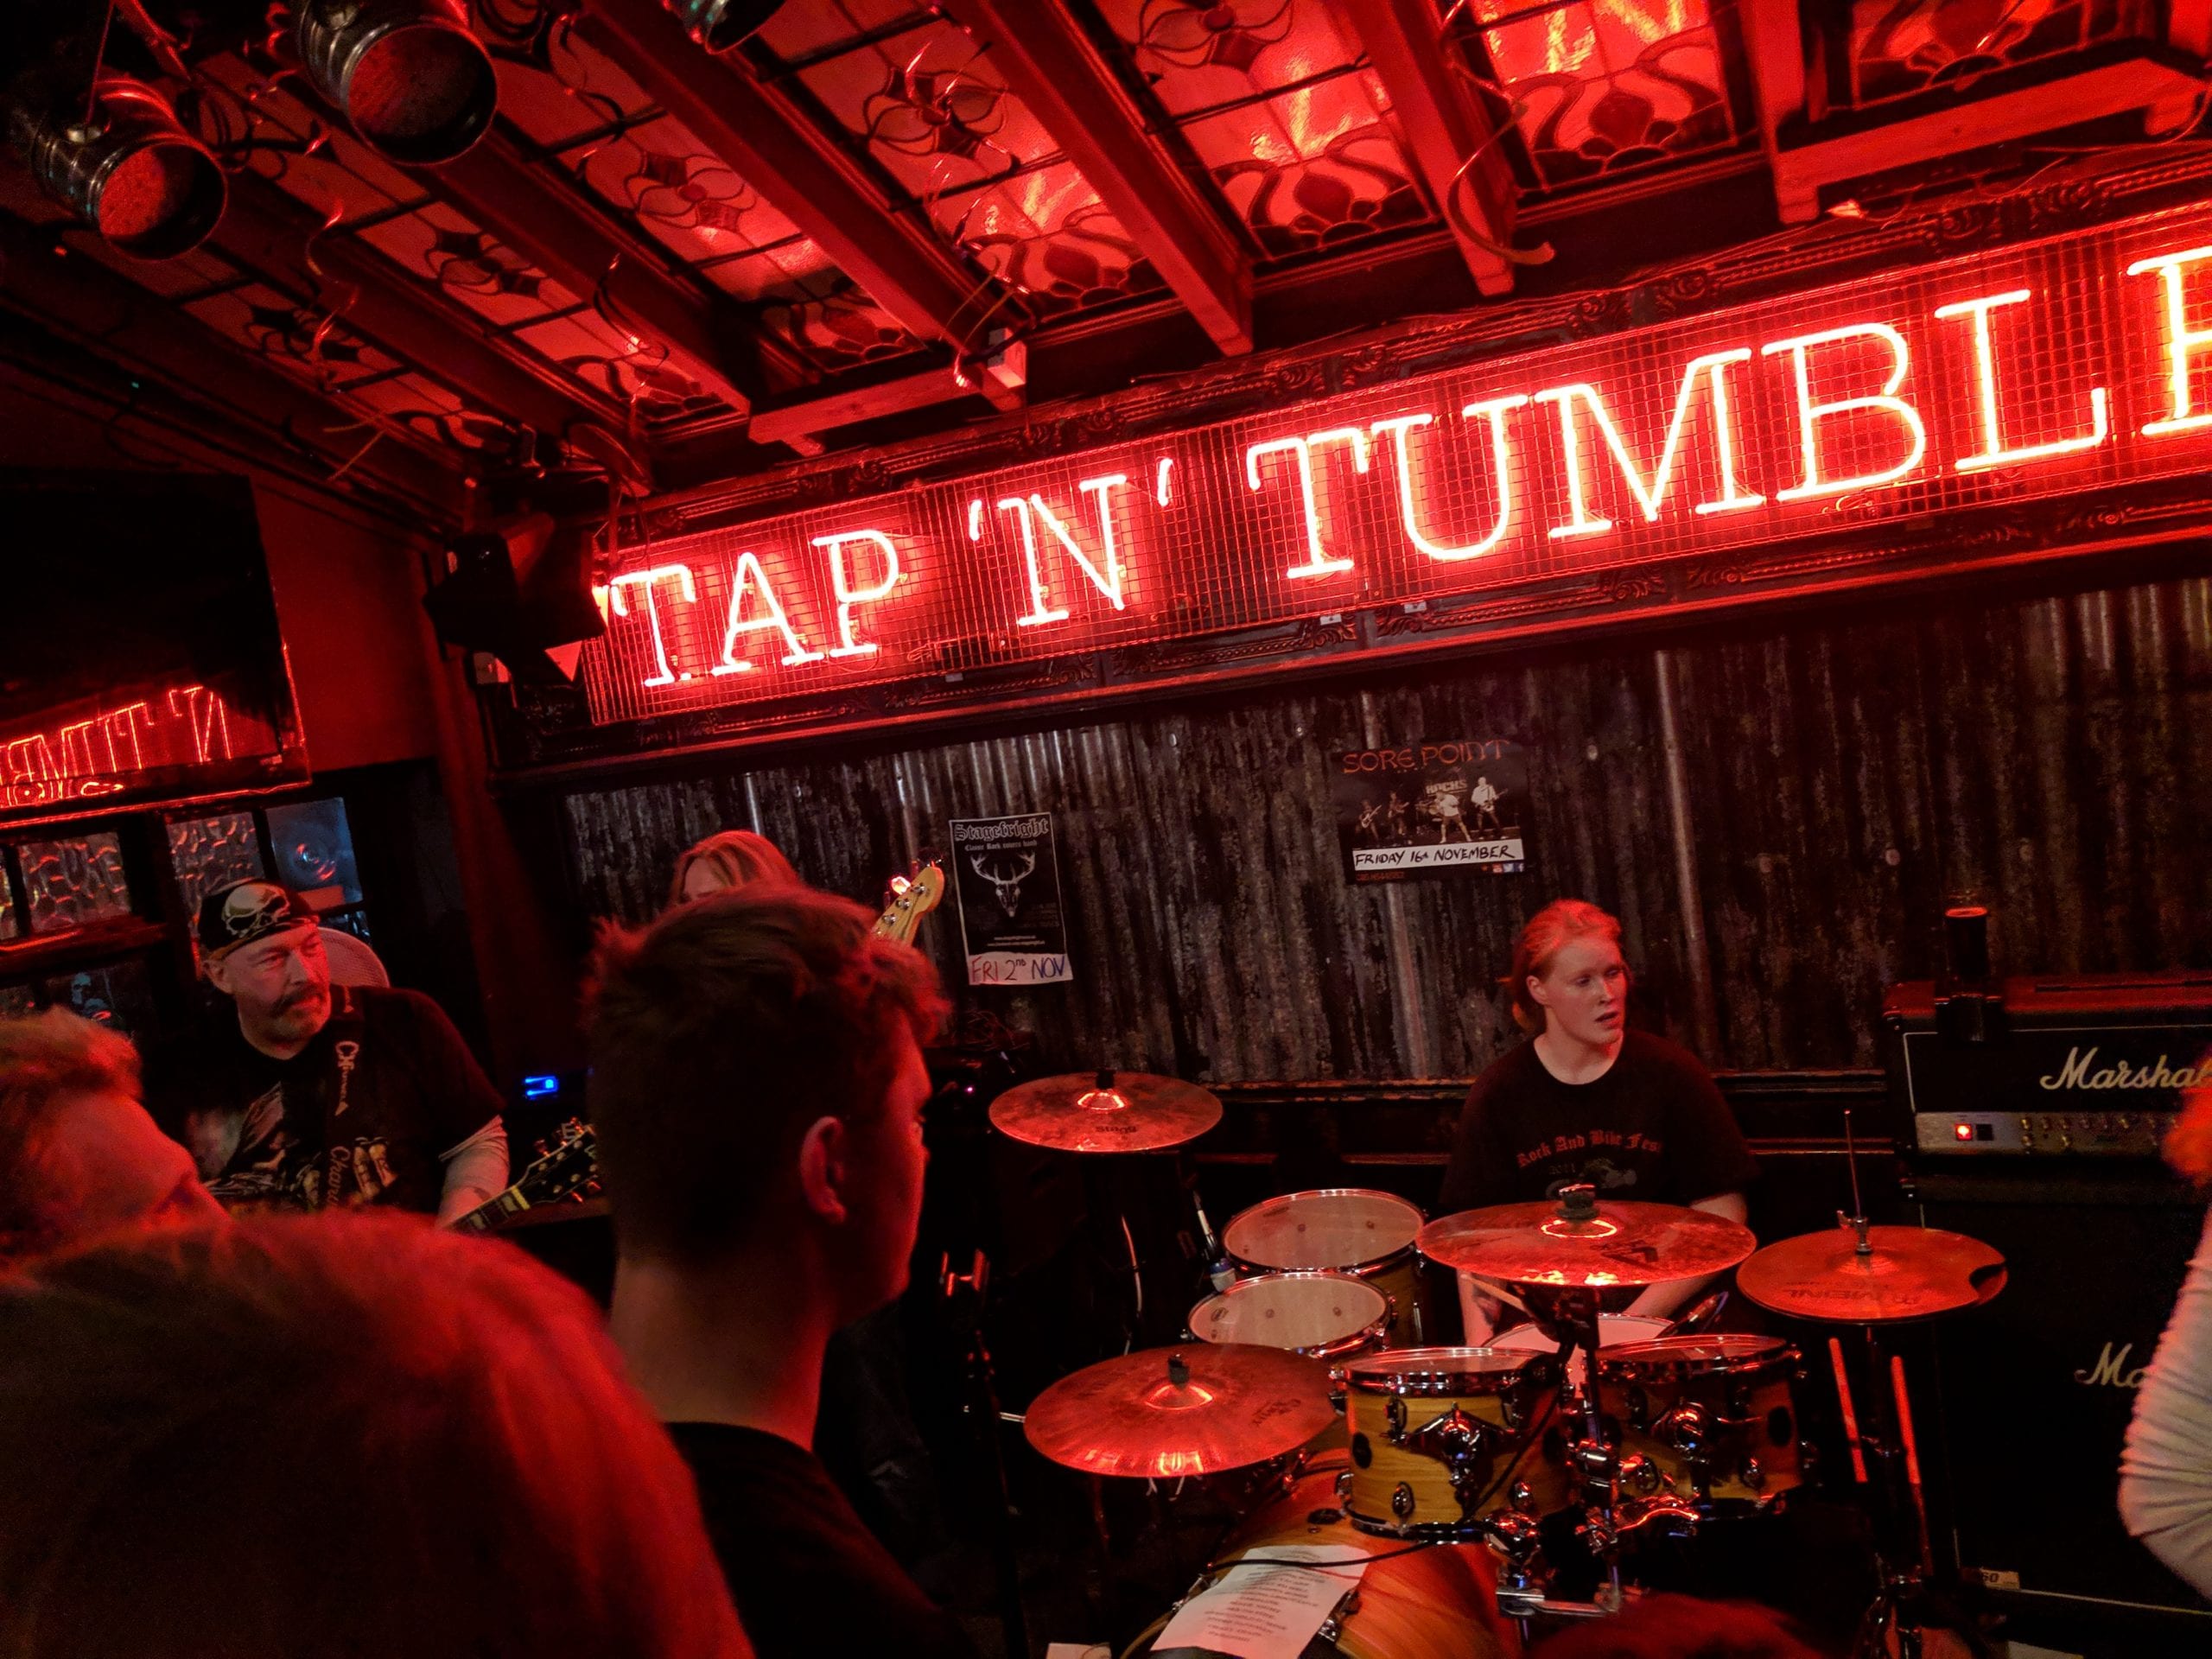 The famous Tap'n'Tumber iconic pub